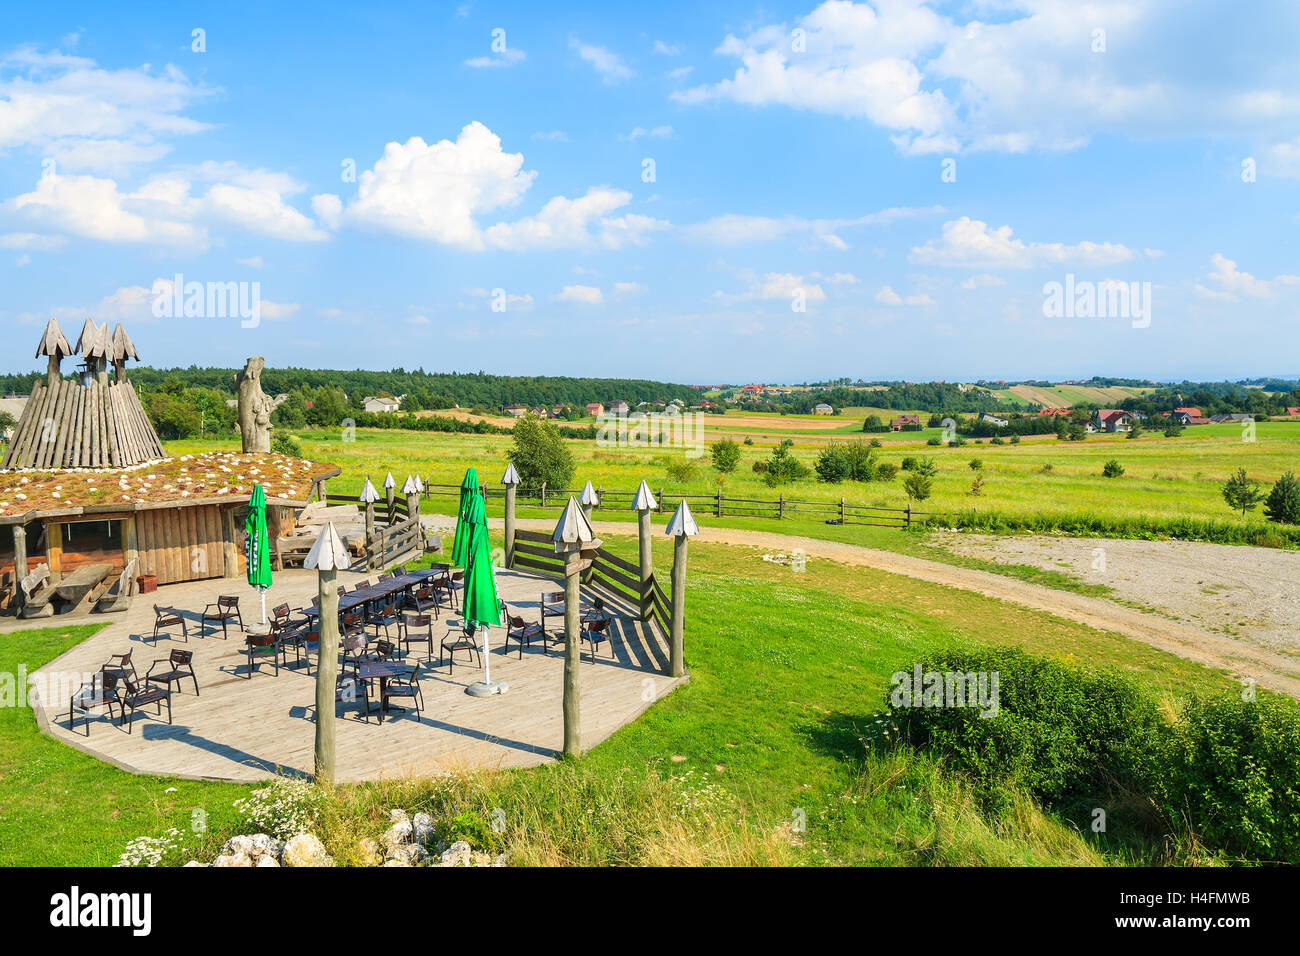 JERZMANOWICE VILLAGE, POLAND - AUG 9, 2014: view of a restaurant near Krakow on sunny summer day, Poland. Rural areas are popular for dining during weekends among Poles. Stock Photo